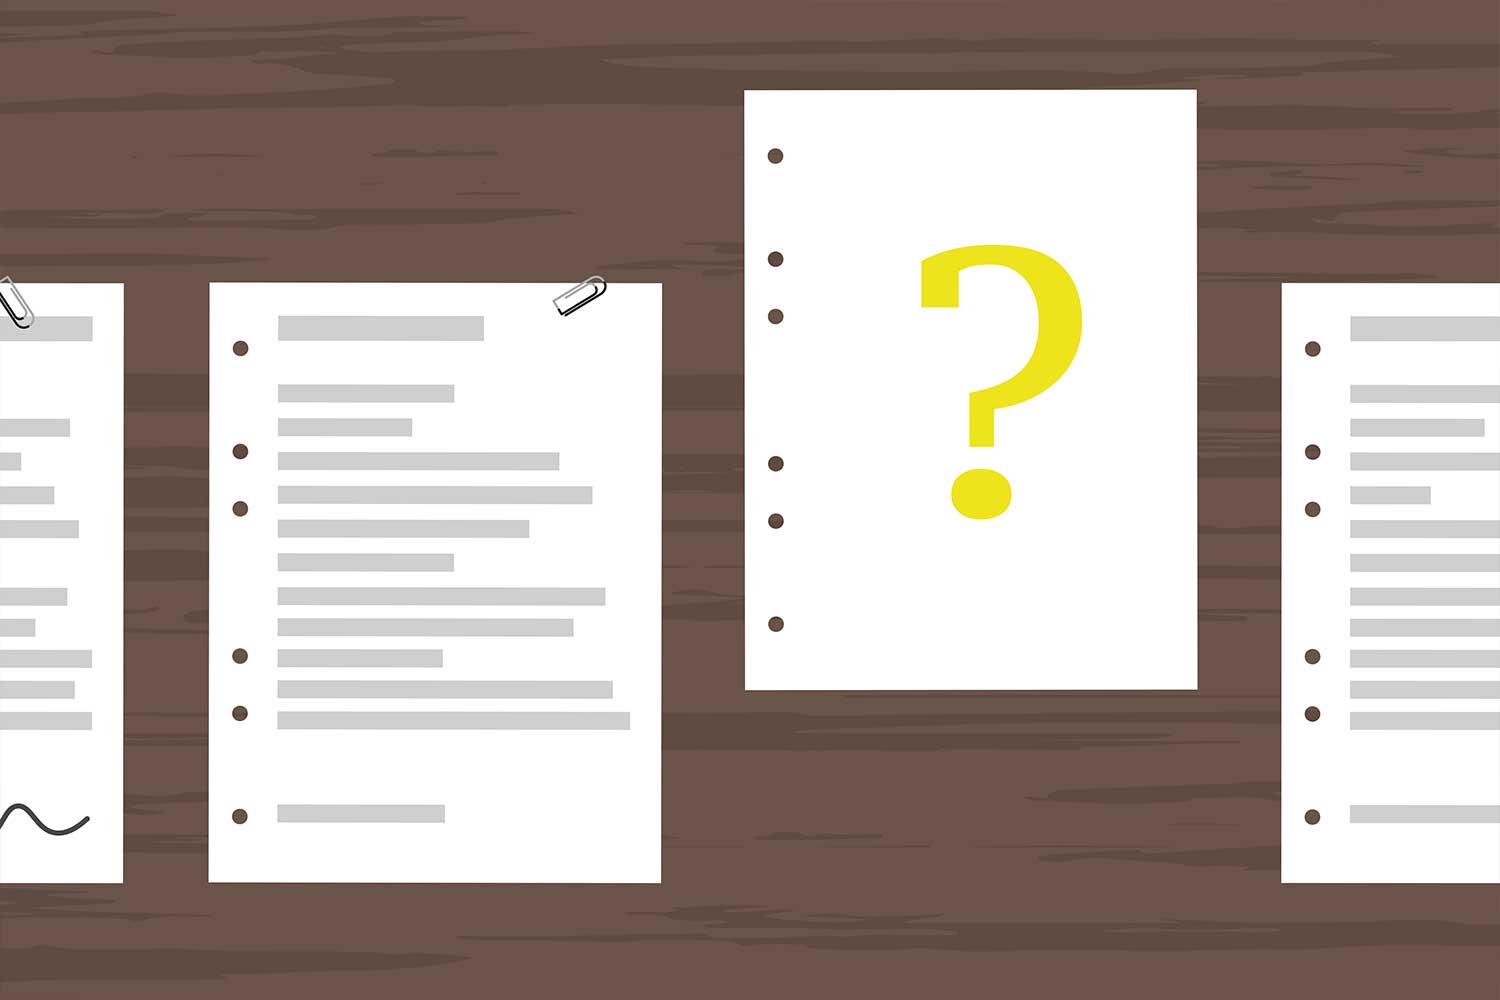 Illustration of documents on a table with a question mark on one